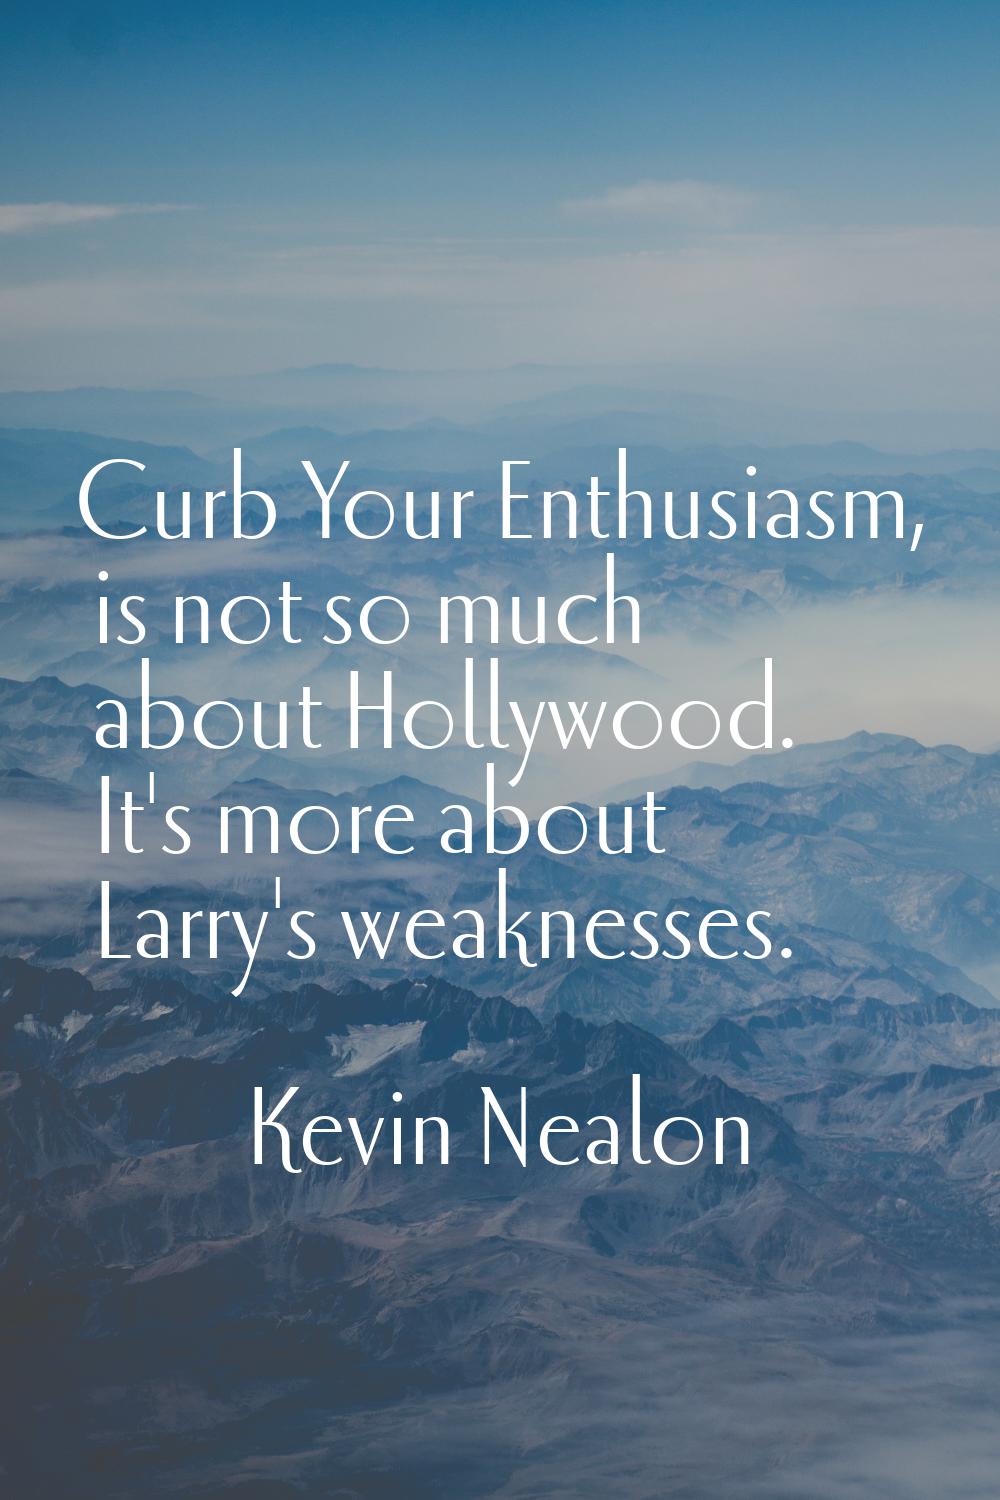 Curb Your Enthusiasm, is not so much about Hollywood. It's more about Larry's weaknesses.